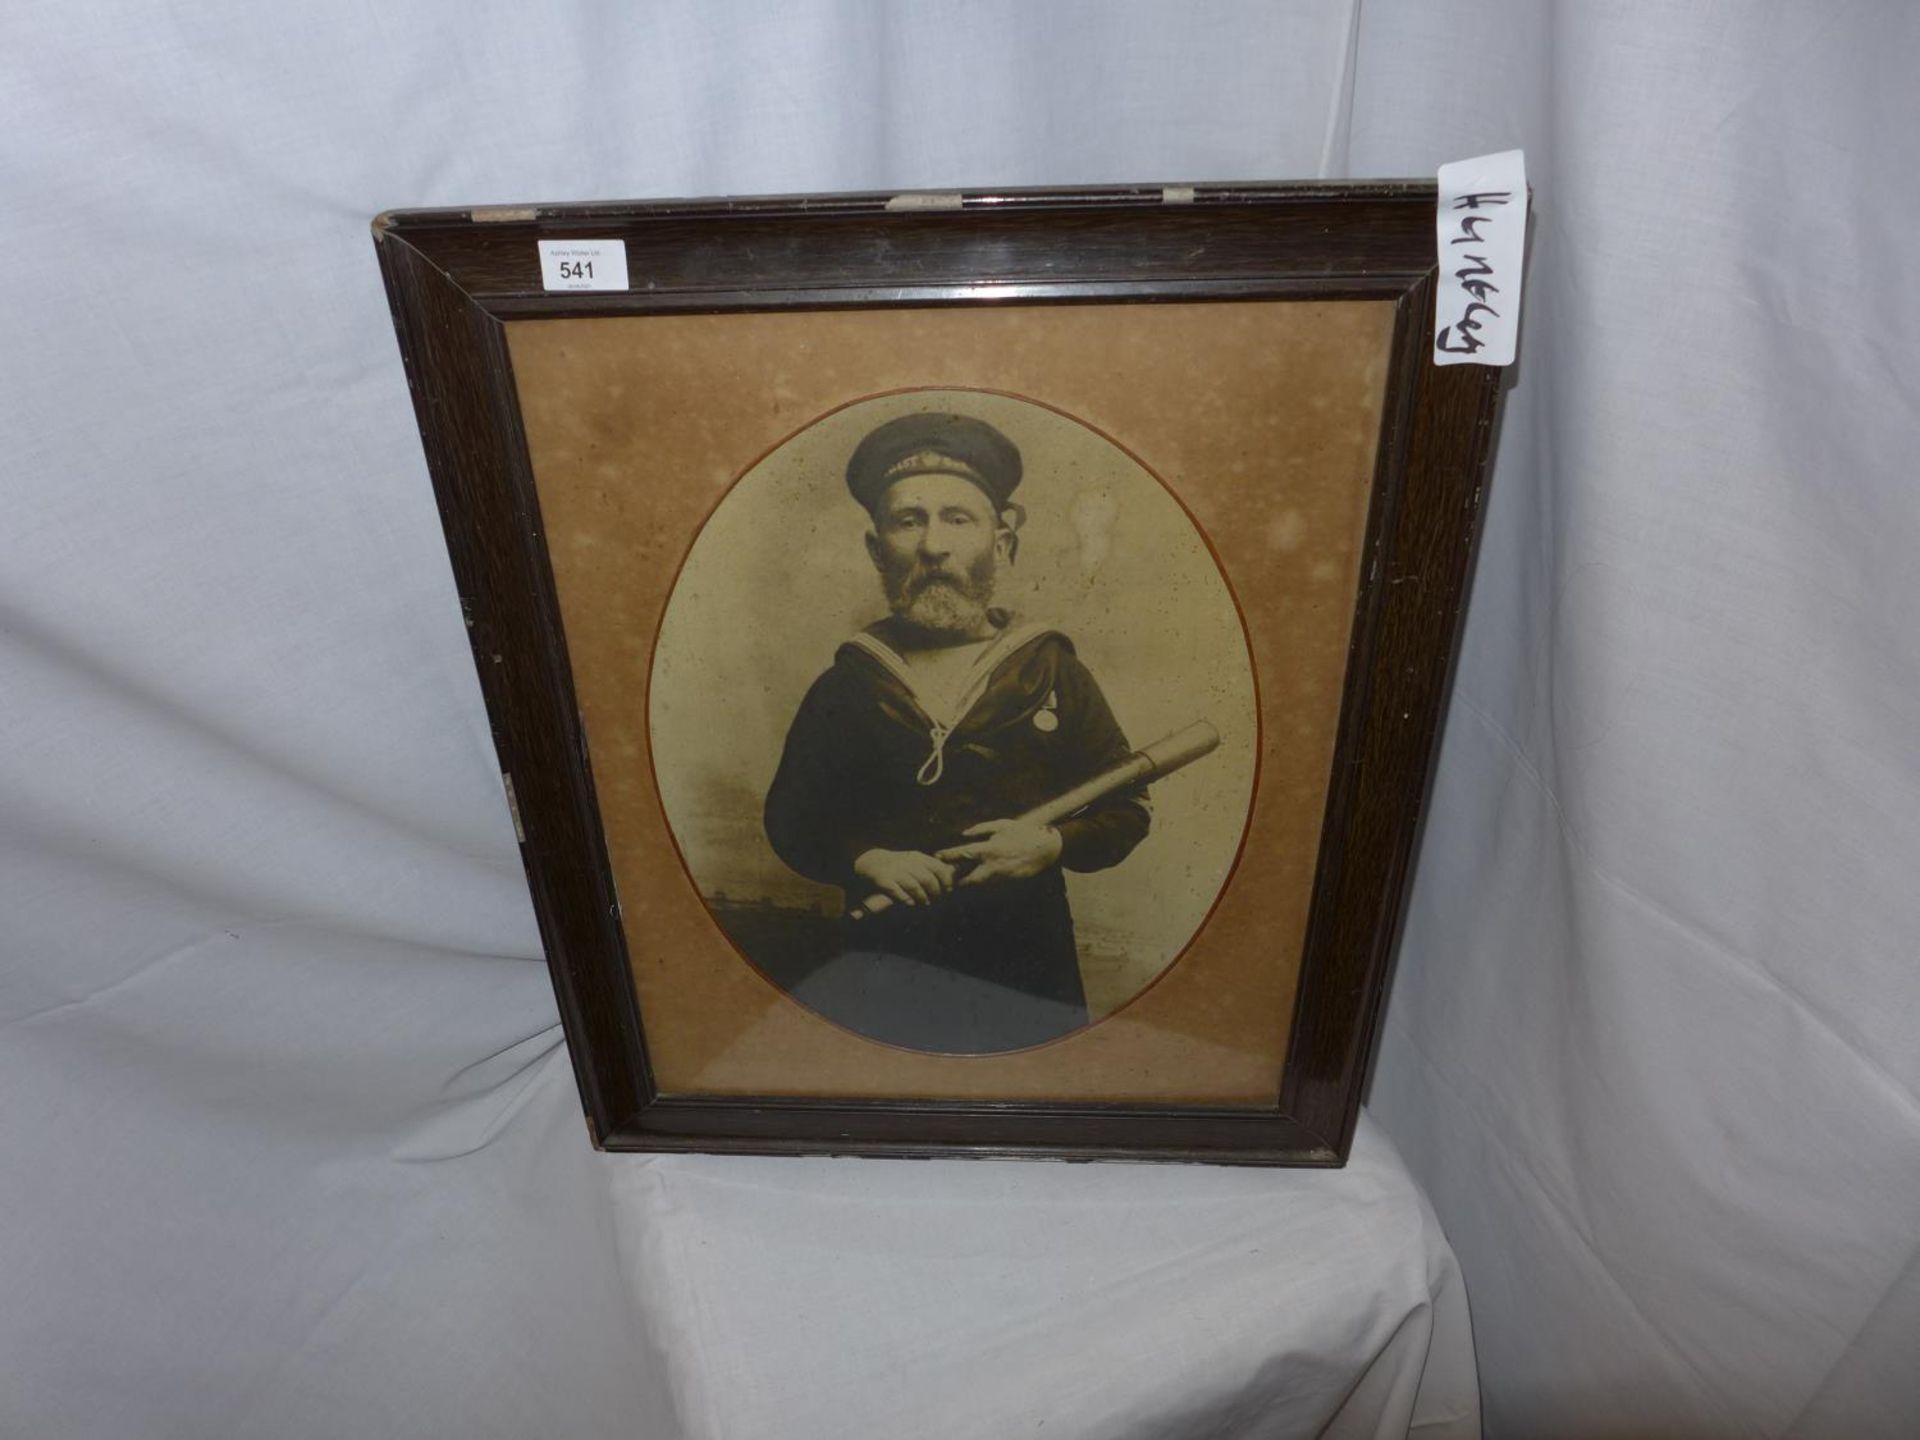 AN EARLY 20TH CENTURY FRAMED BLACK AND WHITE PHOTOGRAPH OF A SAILOR